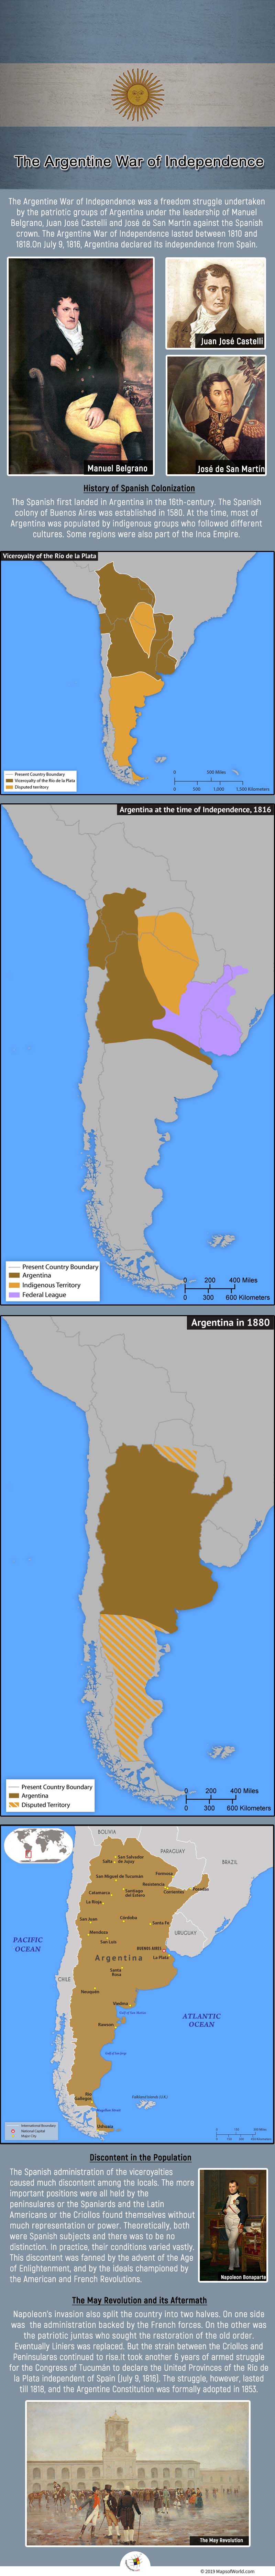 Infographic Giving Details on The Argentine War of Independence